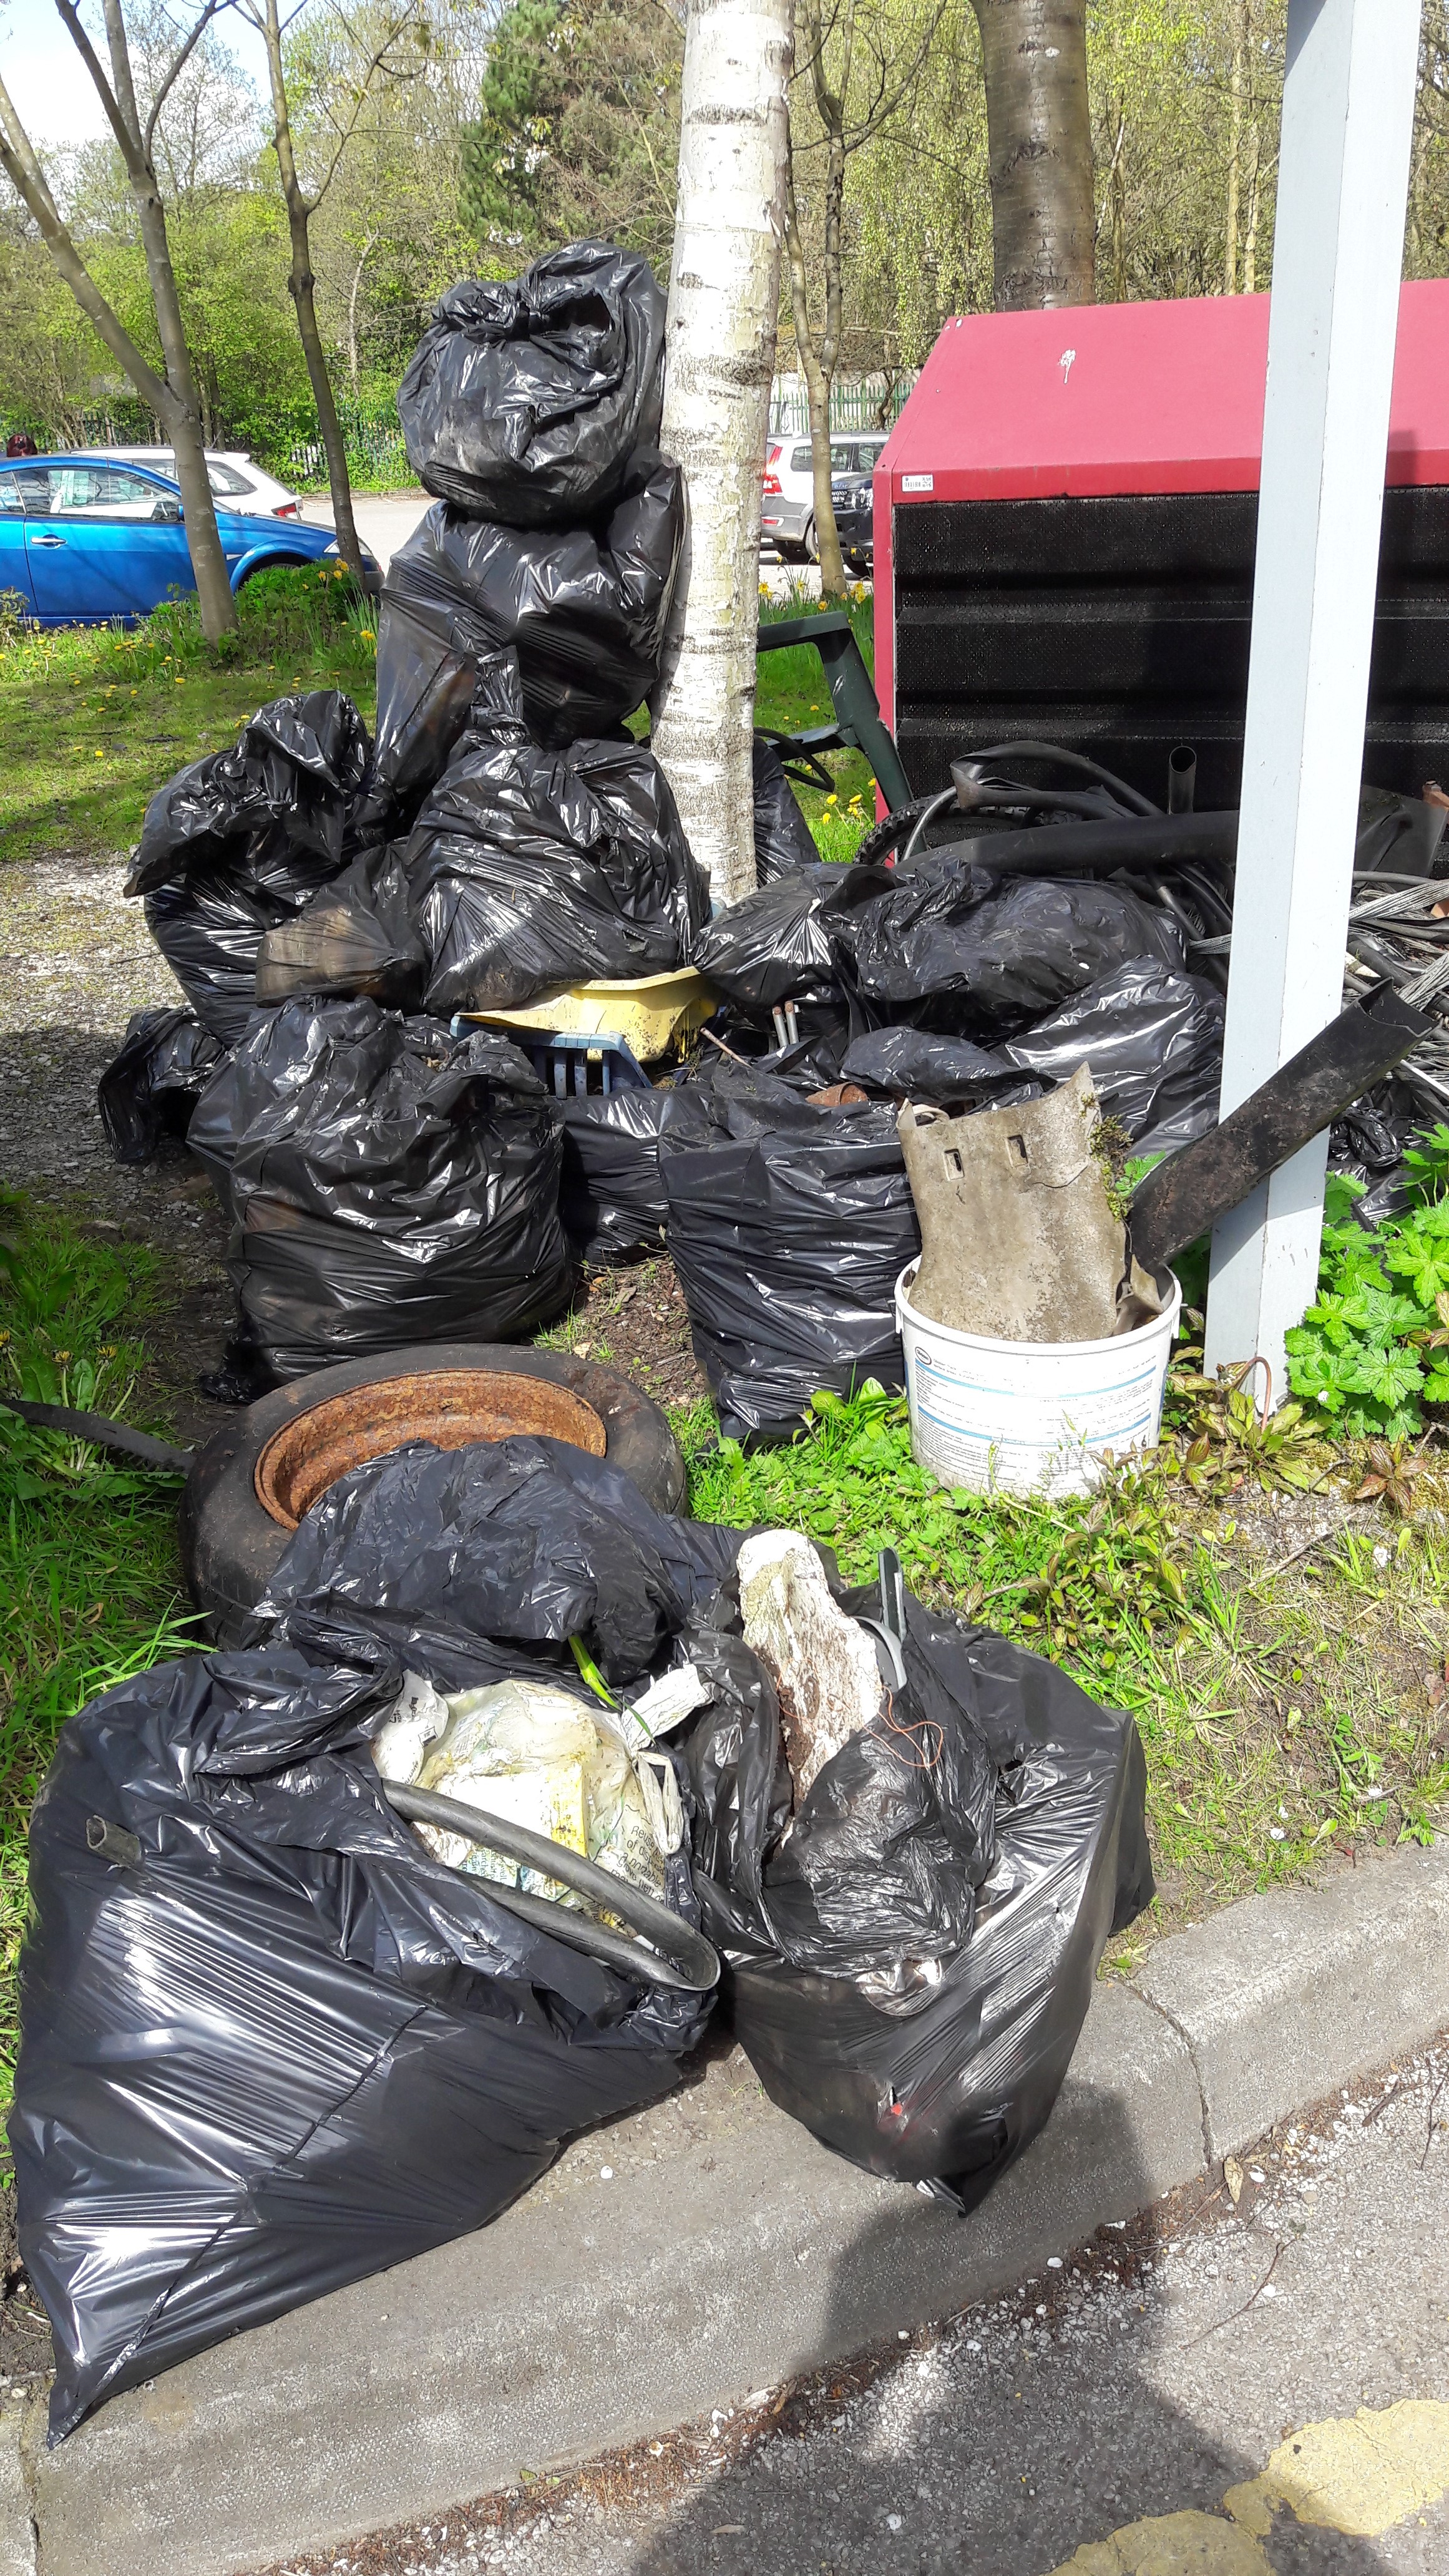 The bags of rubbish collected